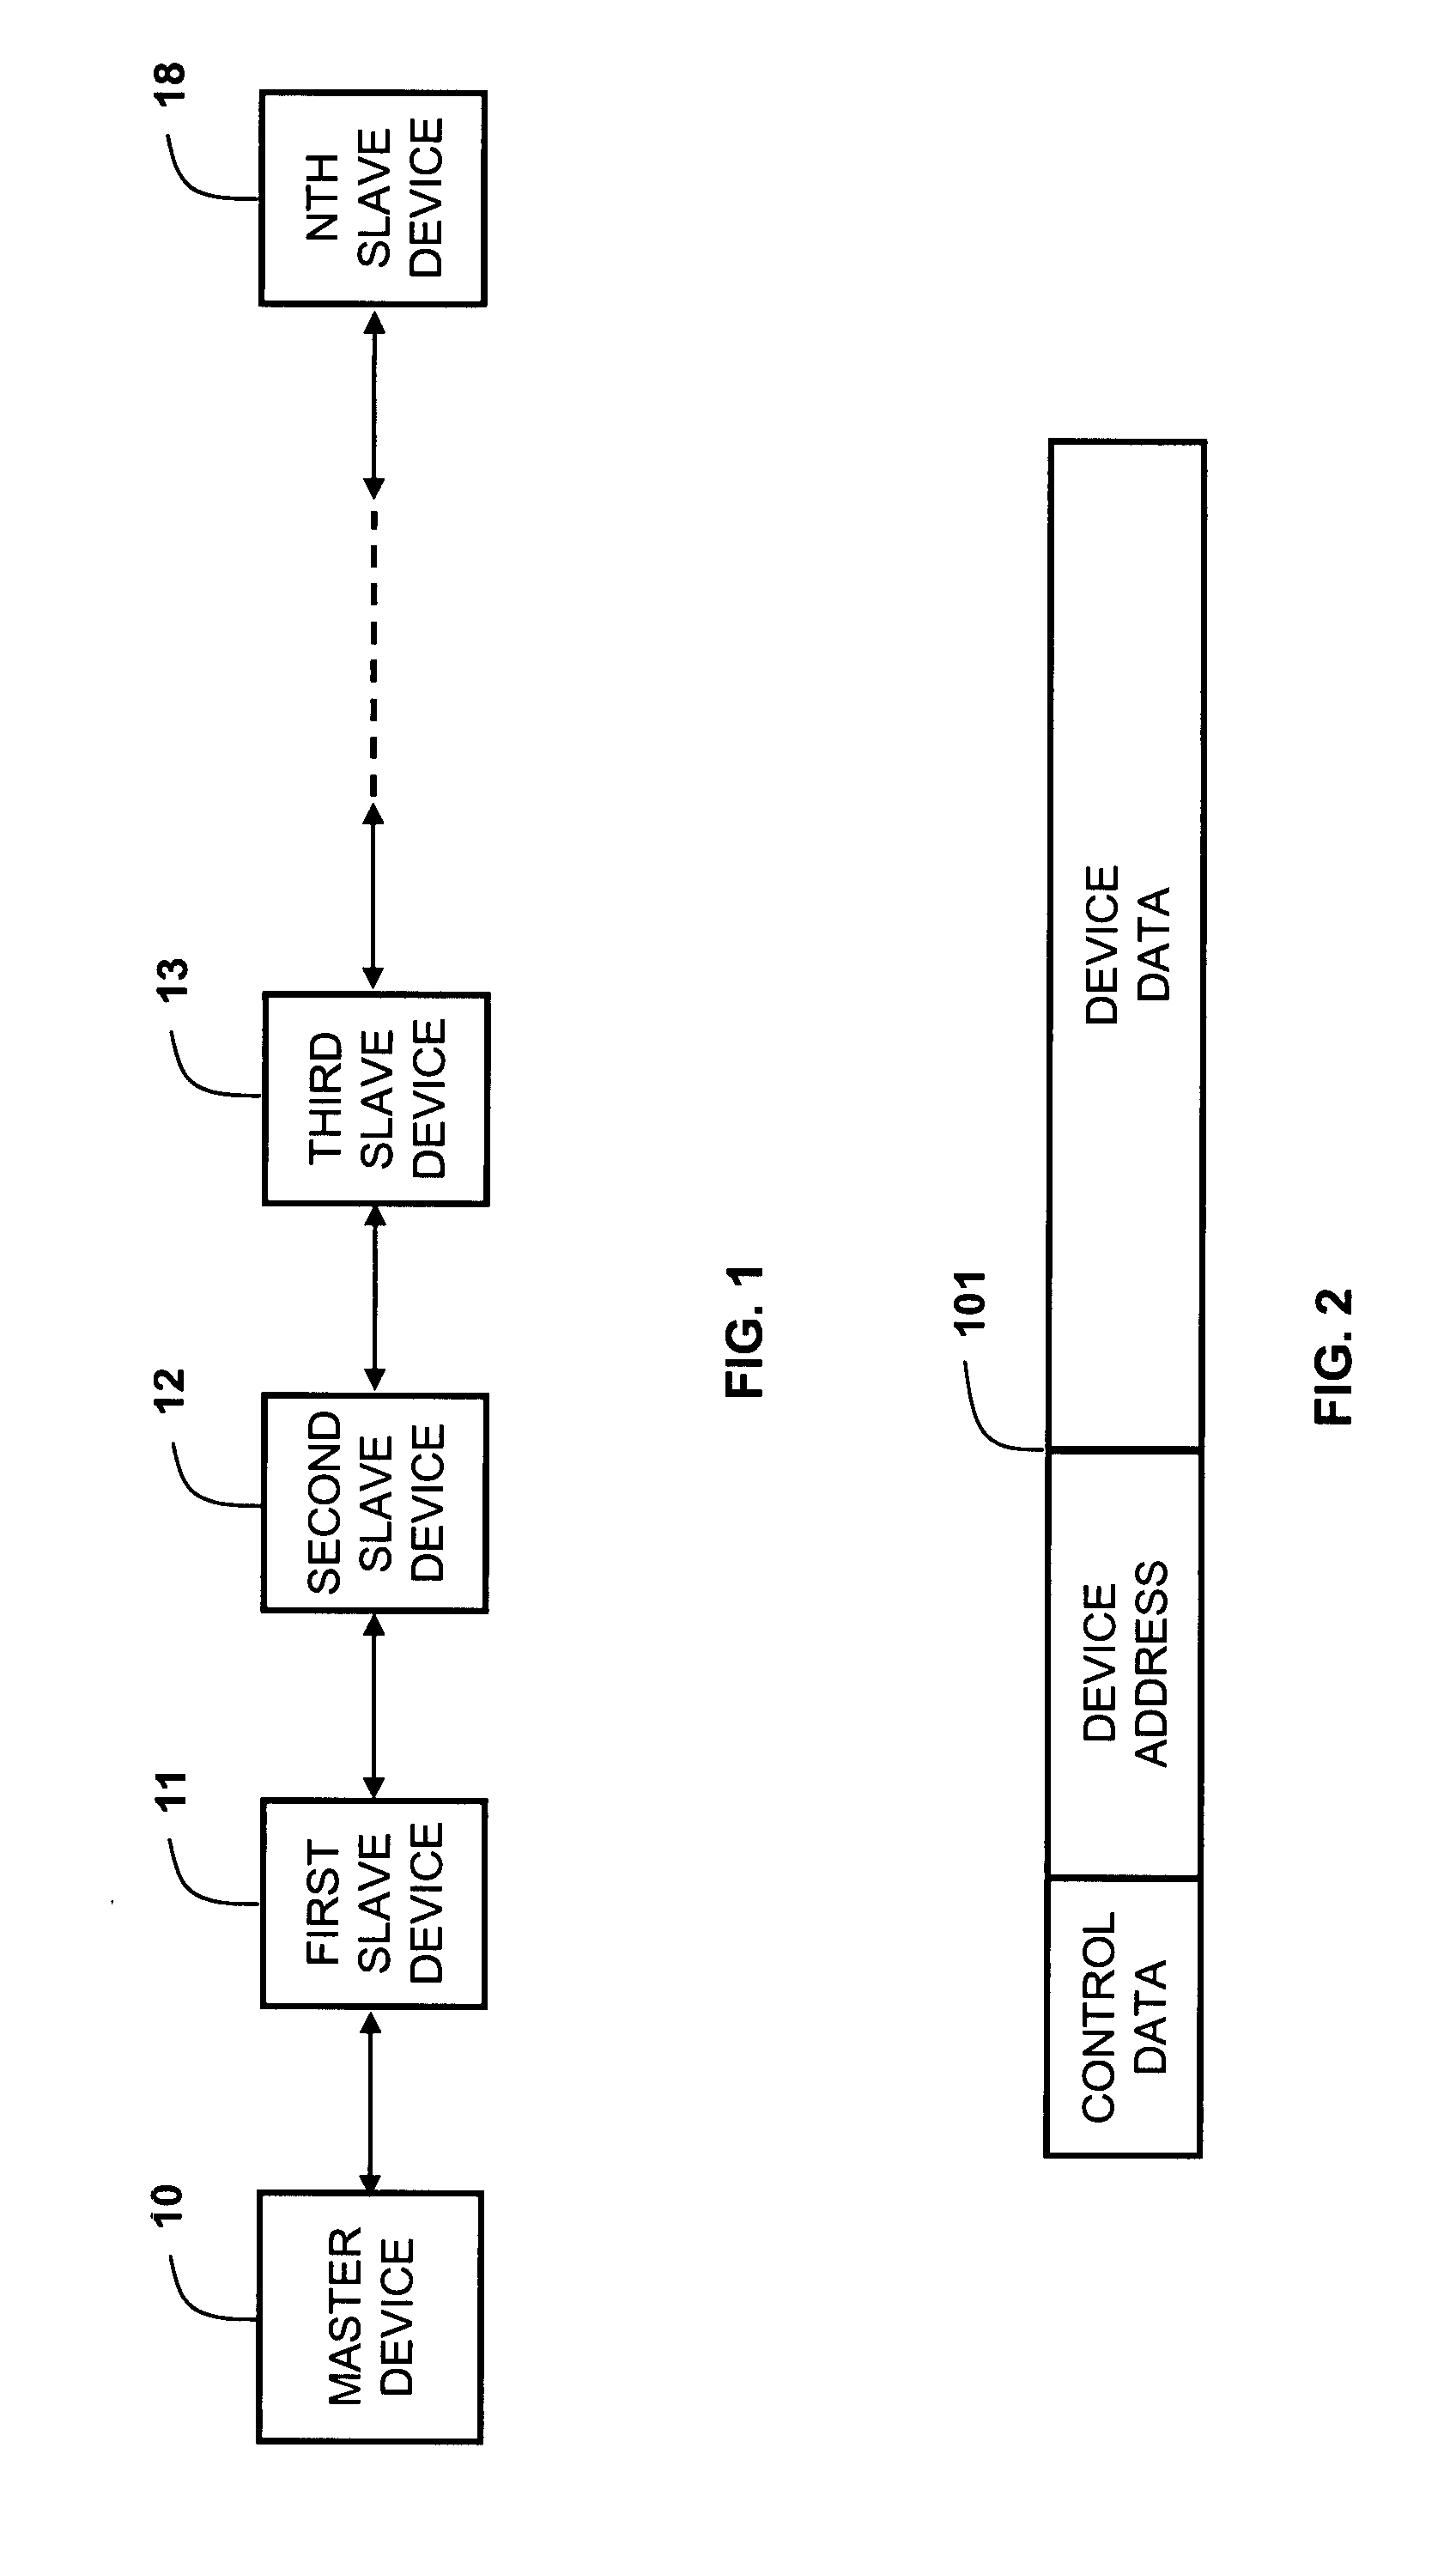 Serial bus device with address assignment by master device